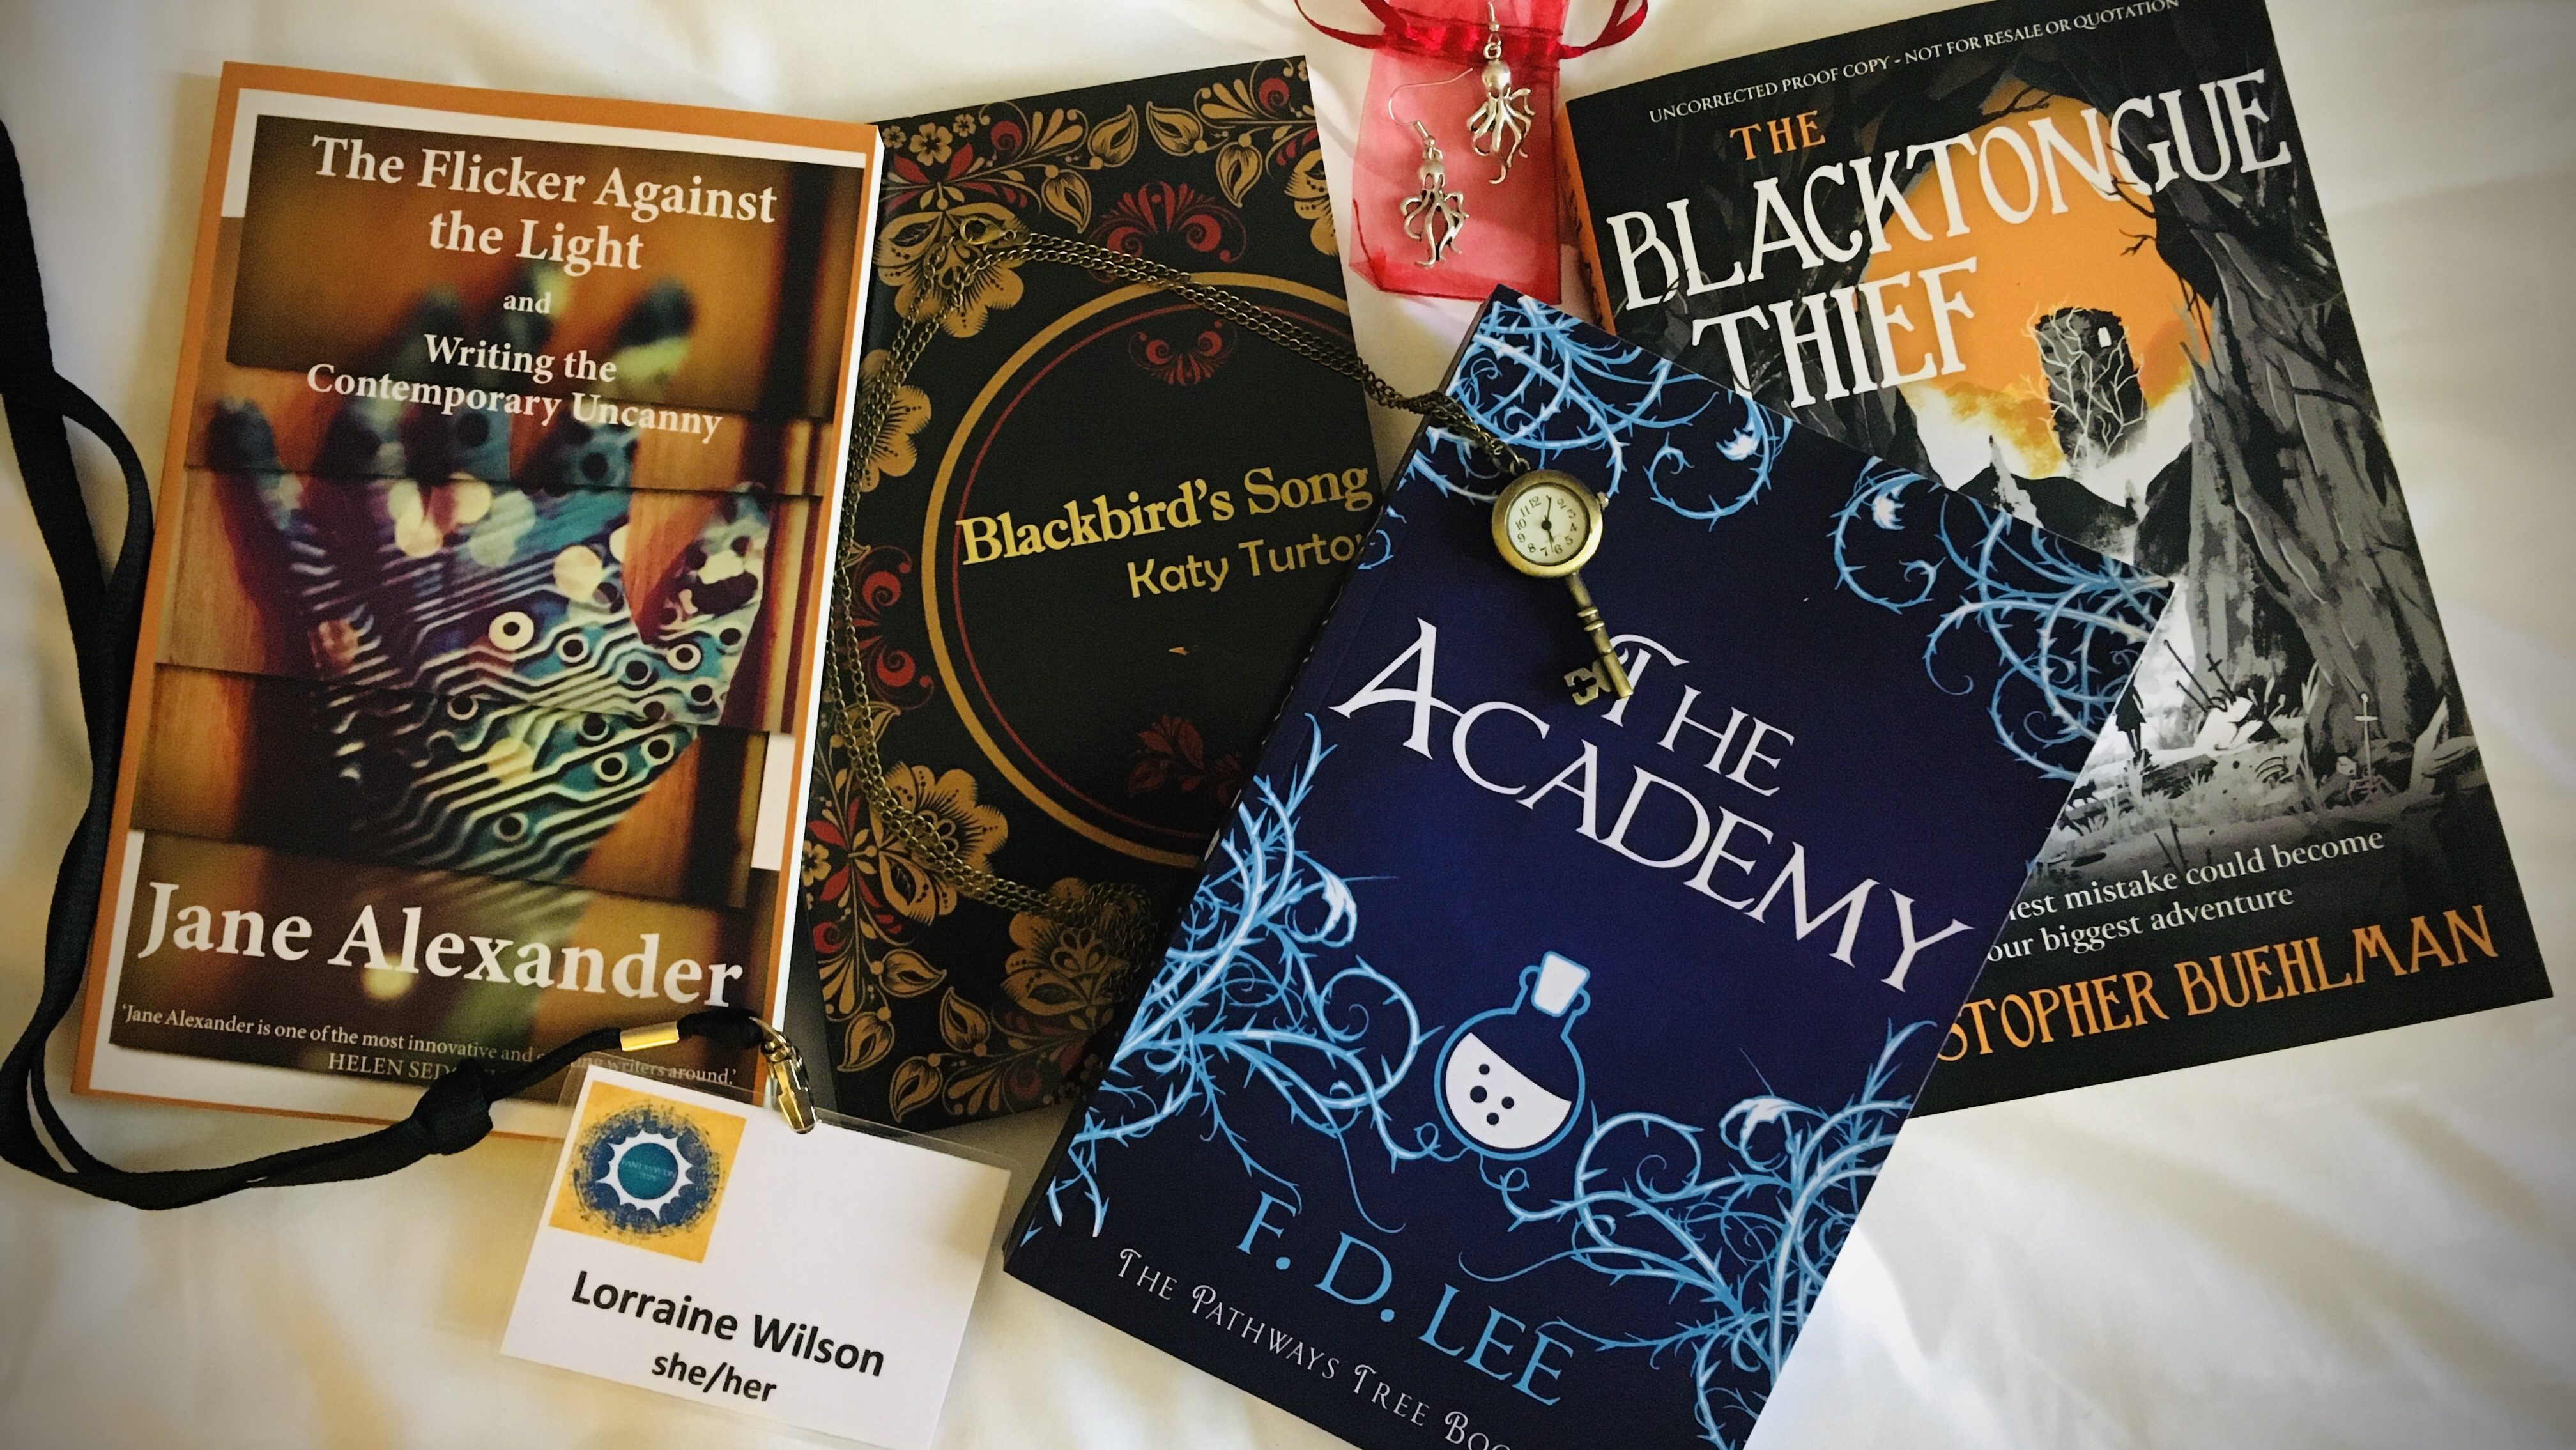 A photo showing four books, a necklace with clock pendant and a pair of octopus earrings. Books are The Blacktoungue Thief, Christopher Buehlman; The Academy, FD Lee; Blackbird's Song, Katy Turton, & The Flicker Against The Light, Jane Alexander.